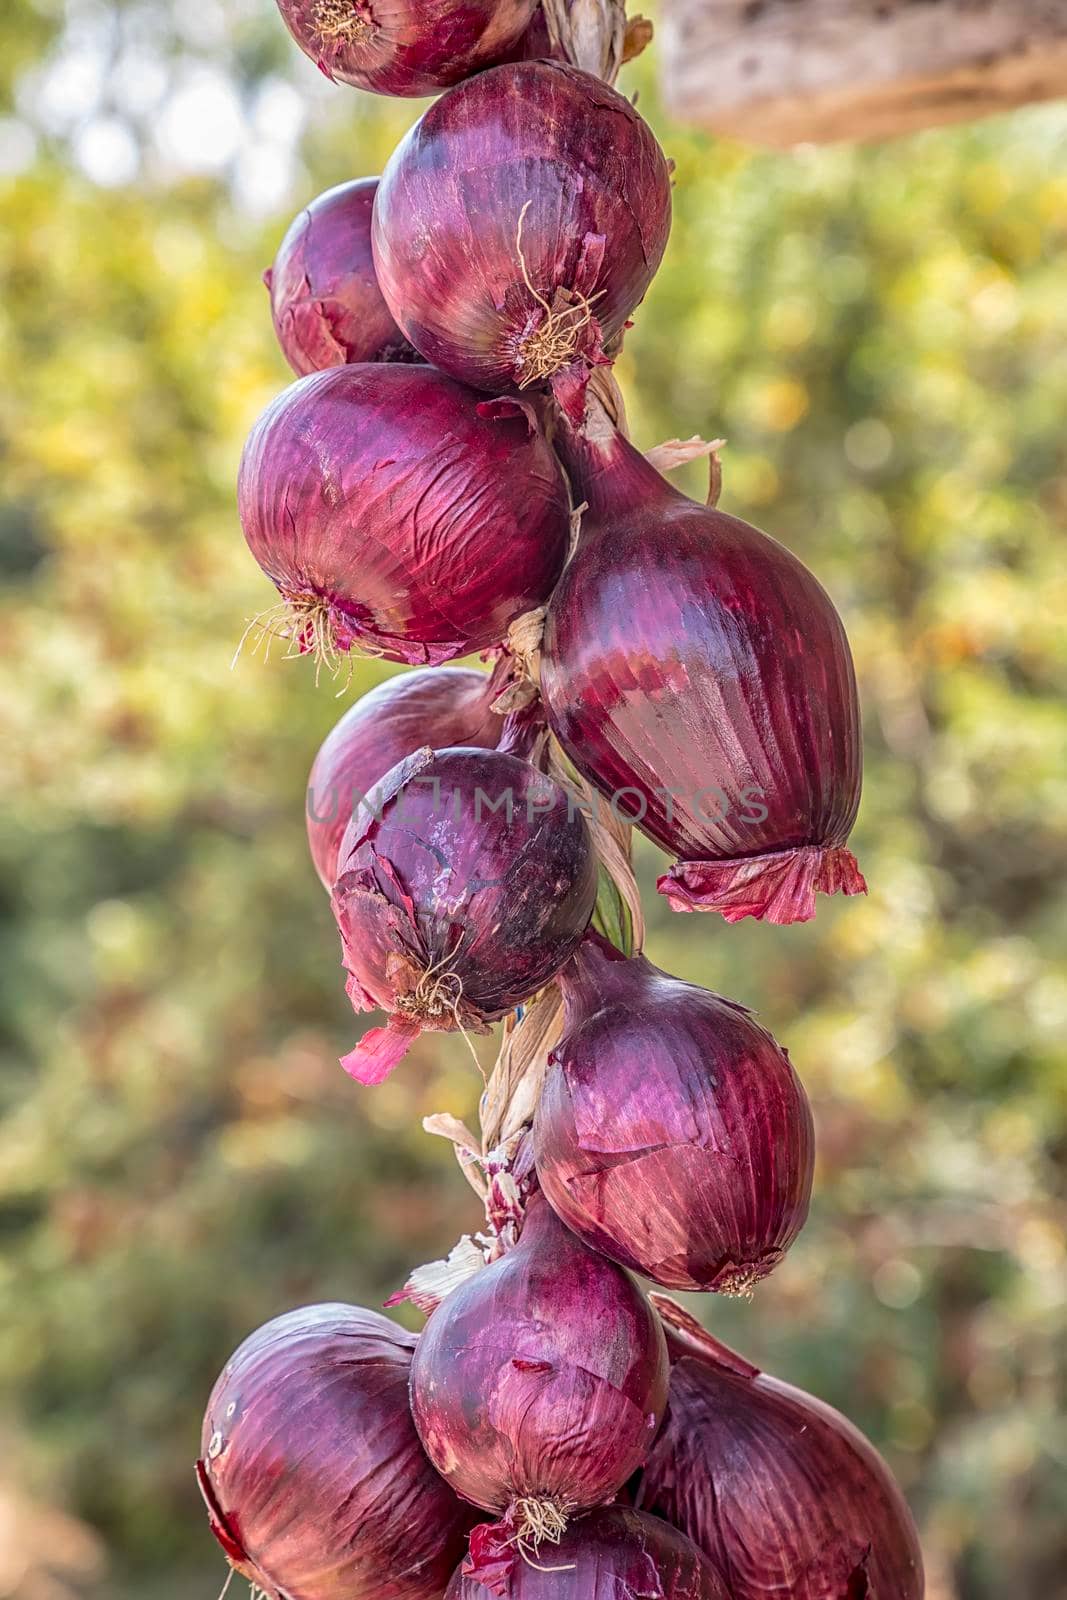 A close view of the hanging bunch bundle of the red onion    by EdVal